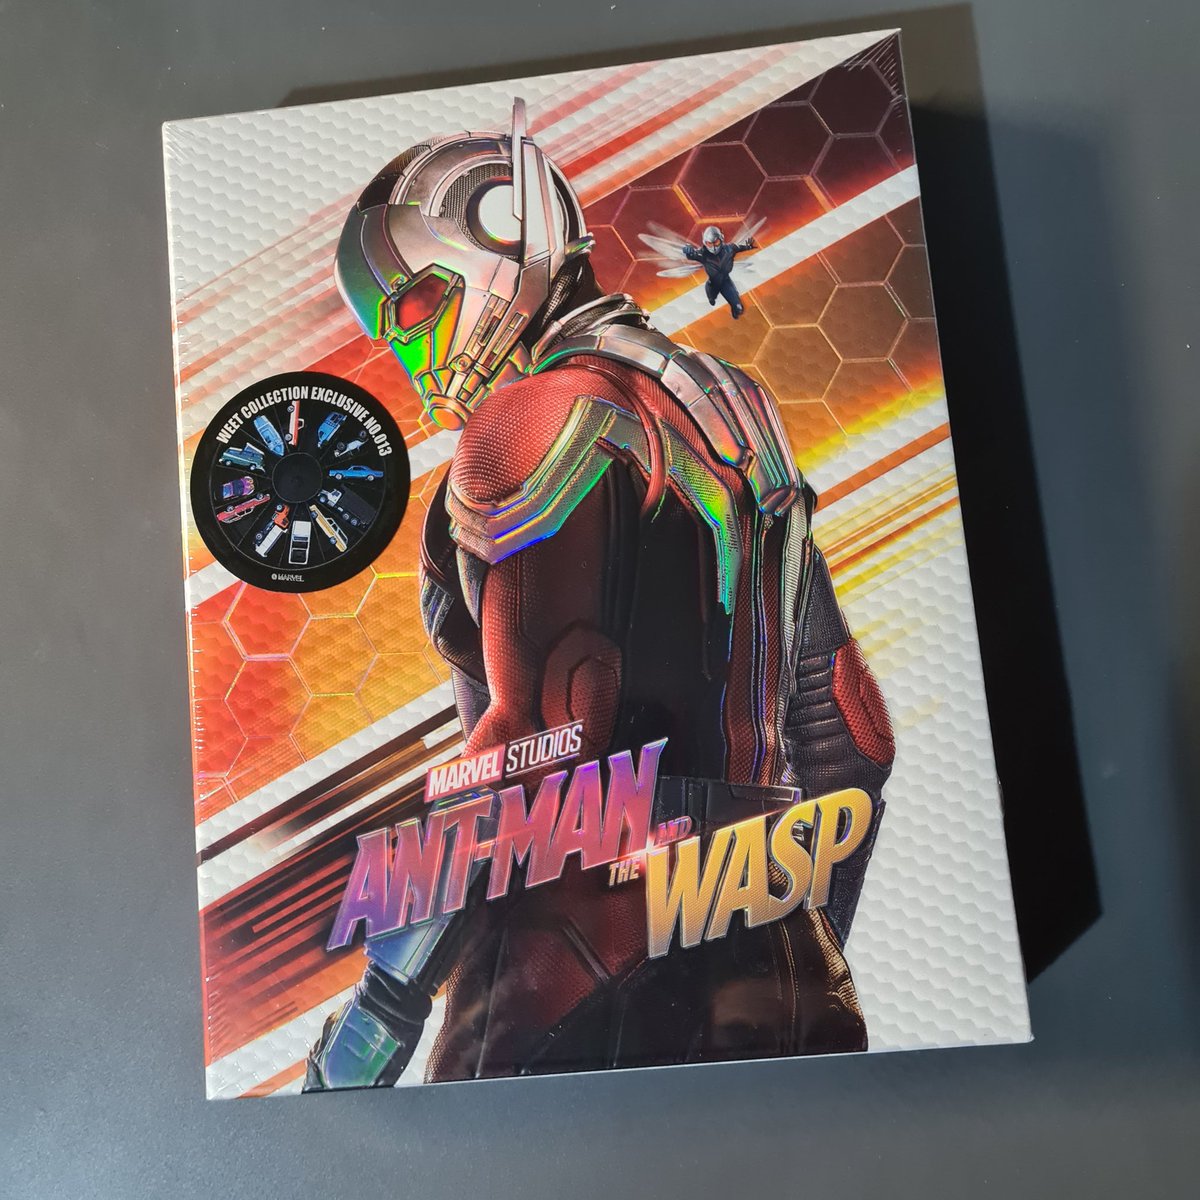 #MondayBlus WeEt exclusive Antman And The Wasp fullslip edition. #BluRay #BluRayCollector #PhysicalMedia #PremiumSteel